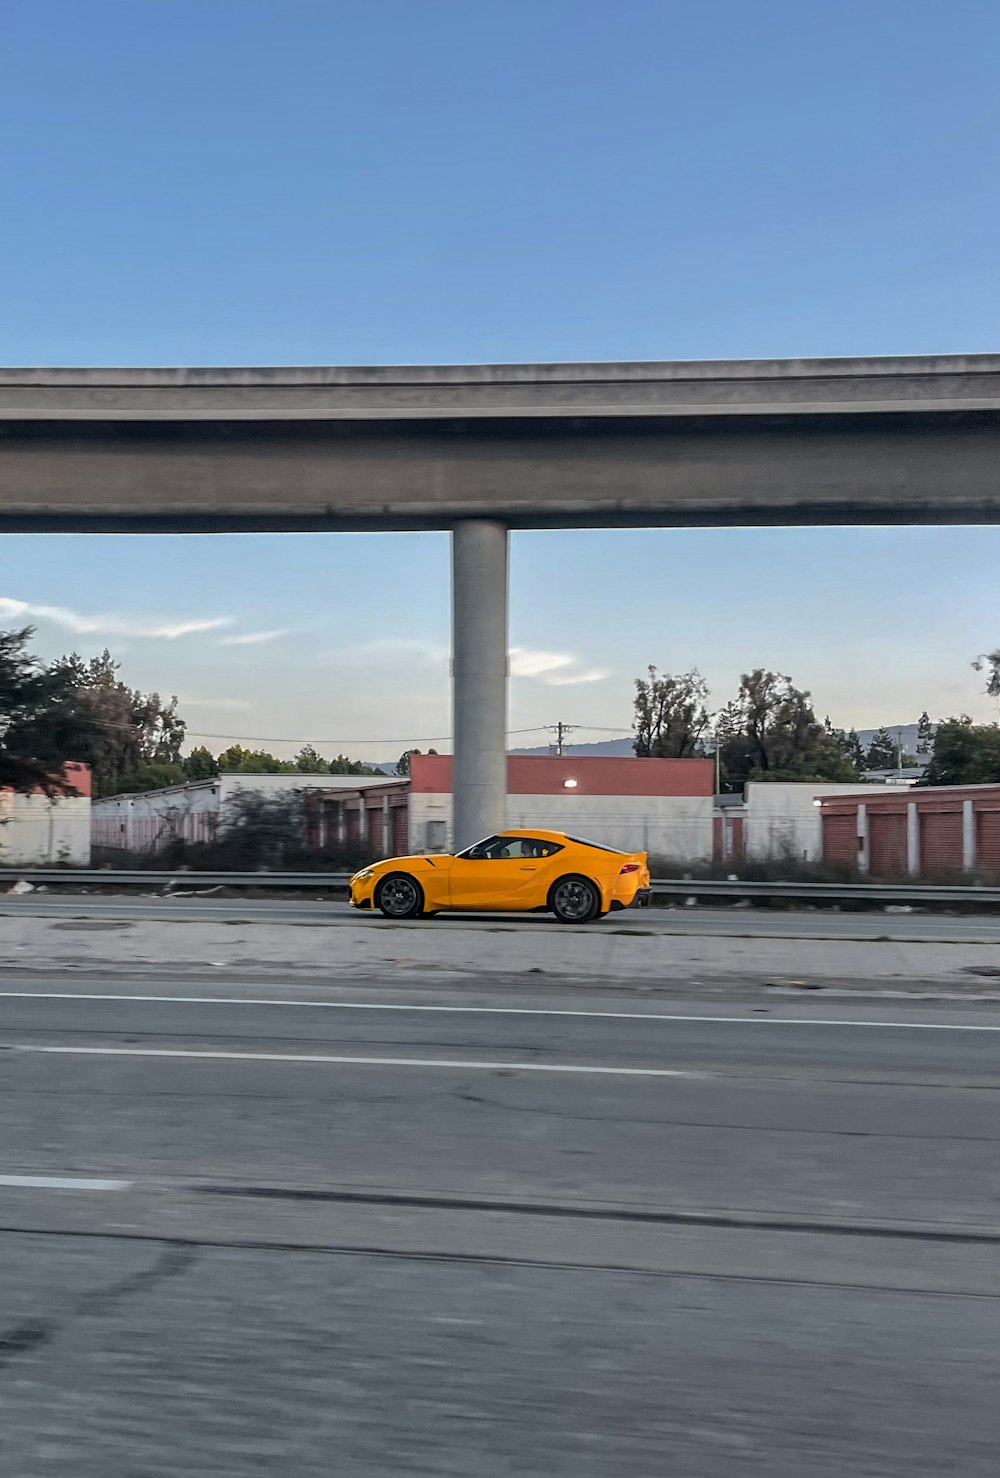 a yellow car is parked on the side of the road